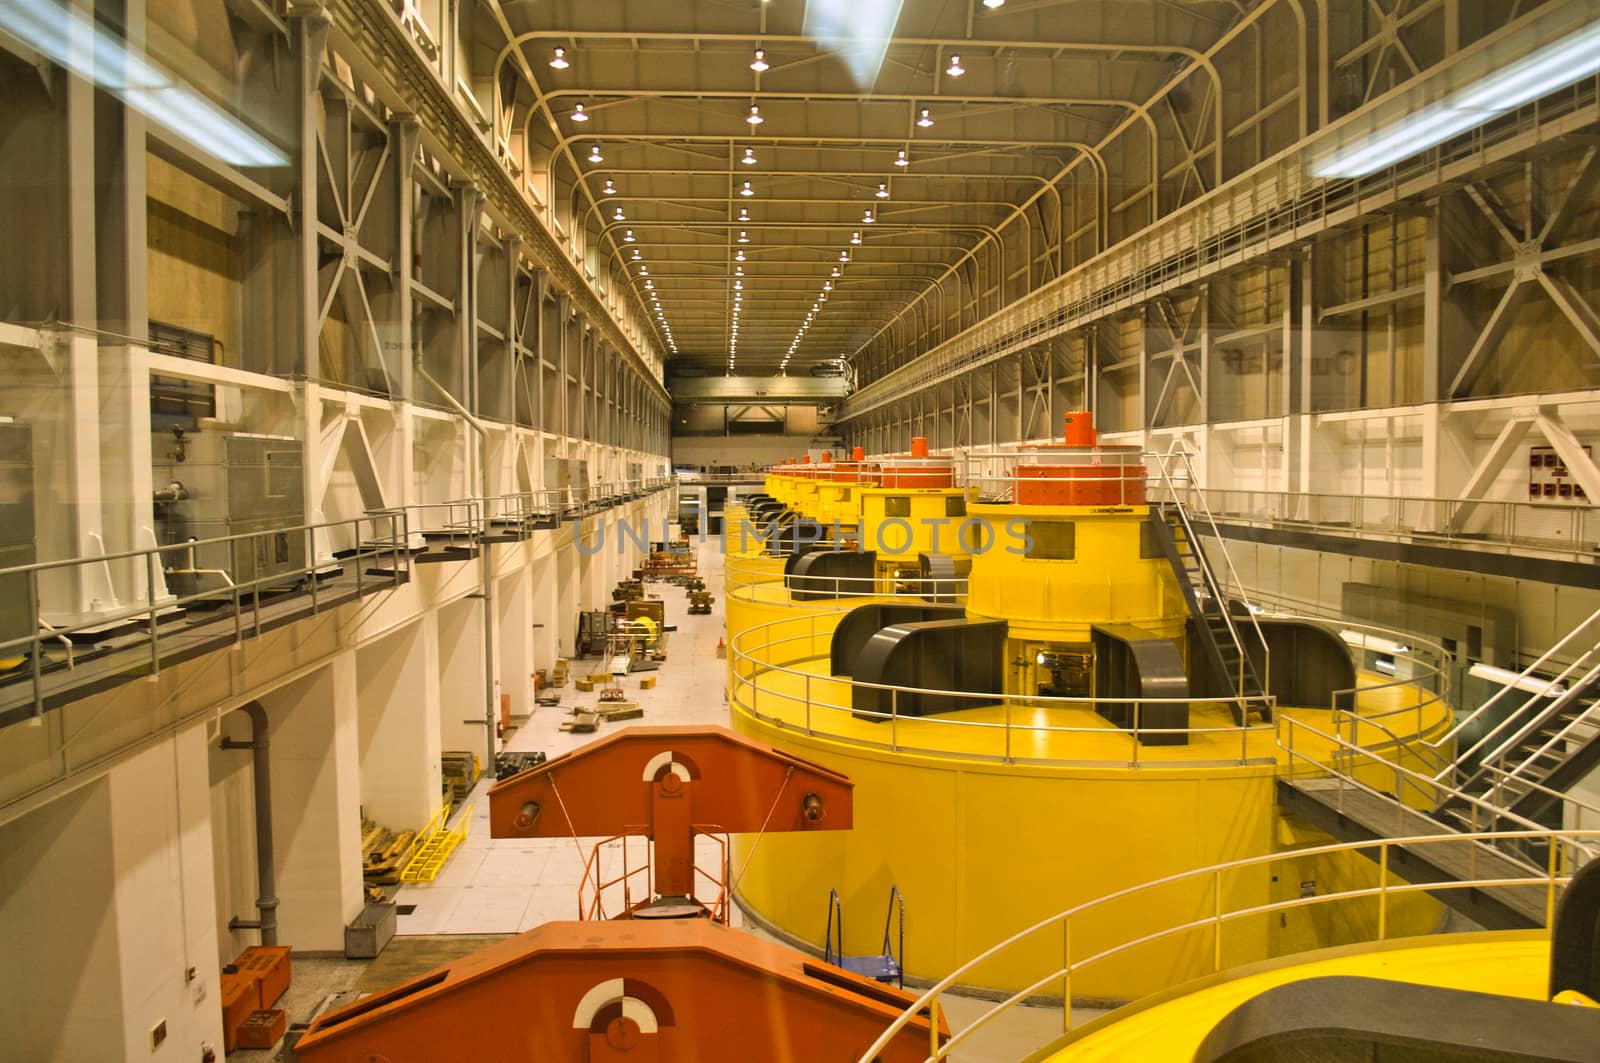 Turbine hall of Glen Canyon hydroelectric power plant near Page, Arizona in the United States. by kb79